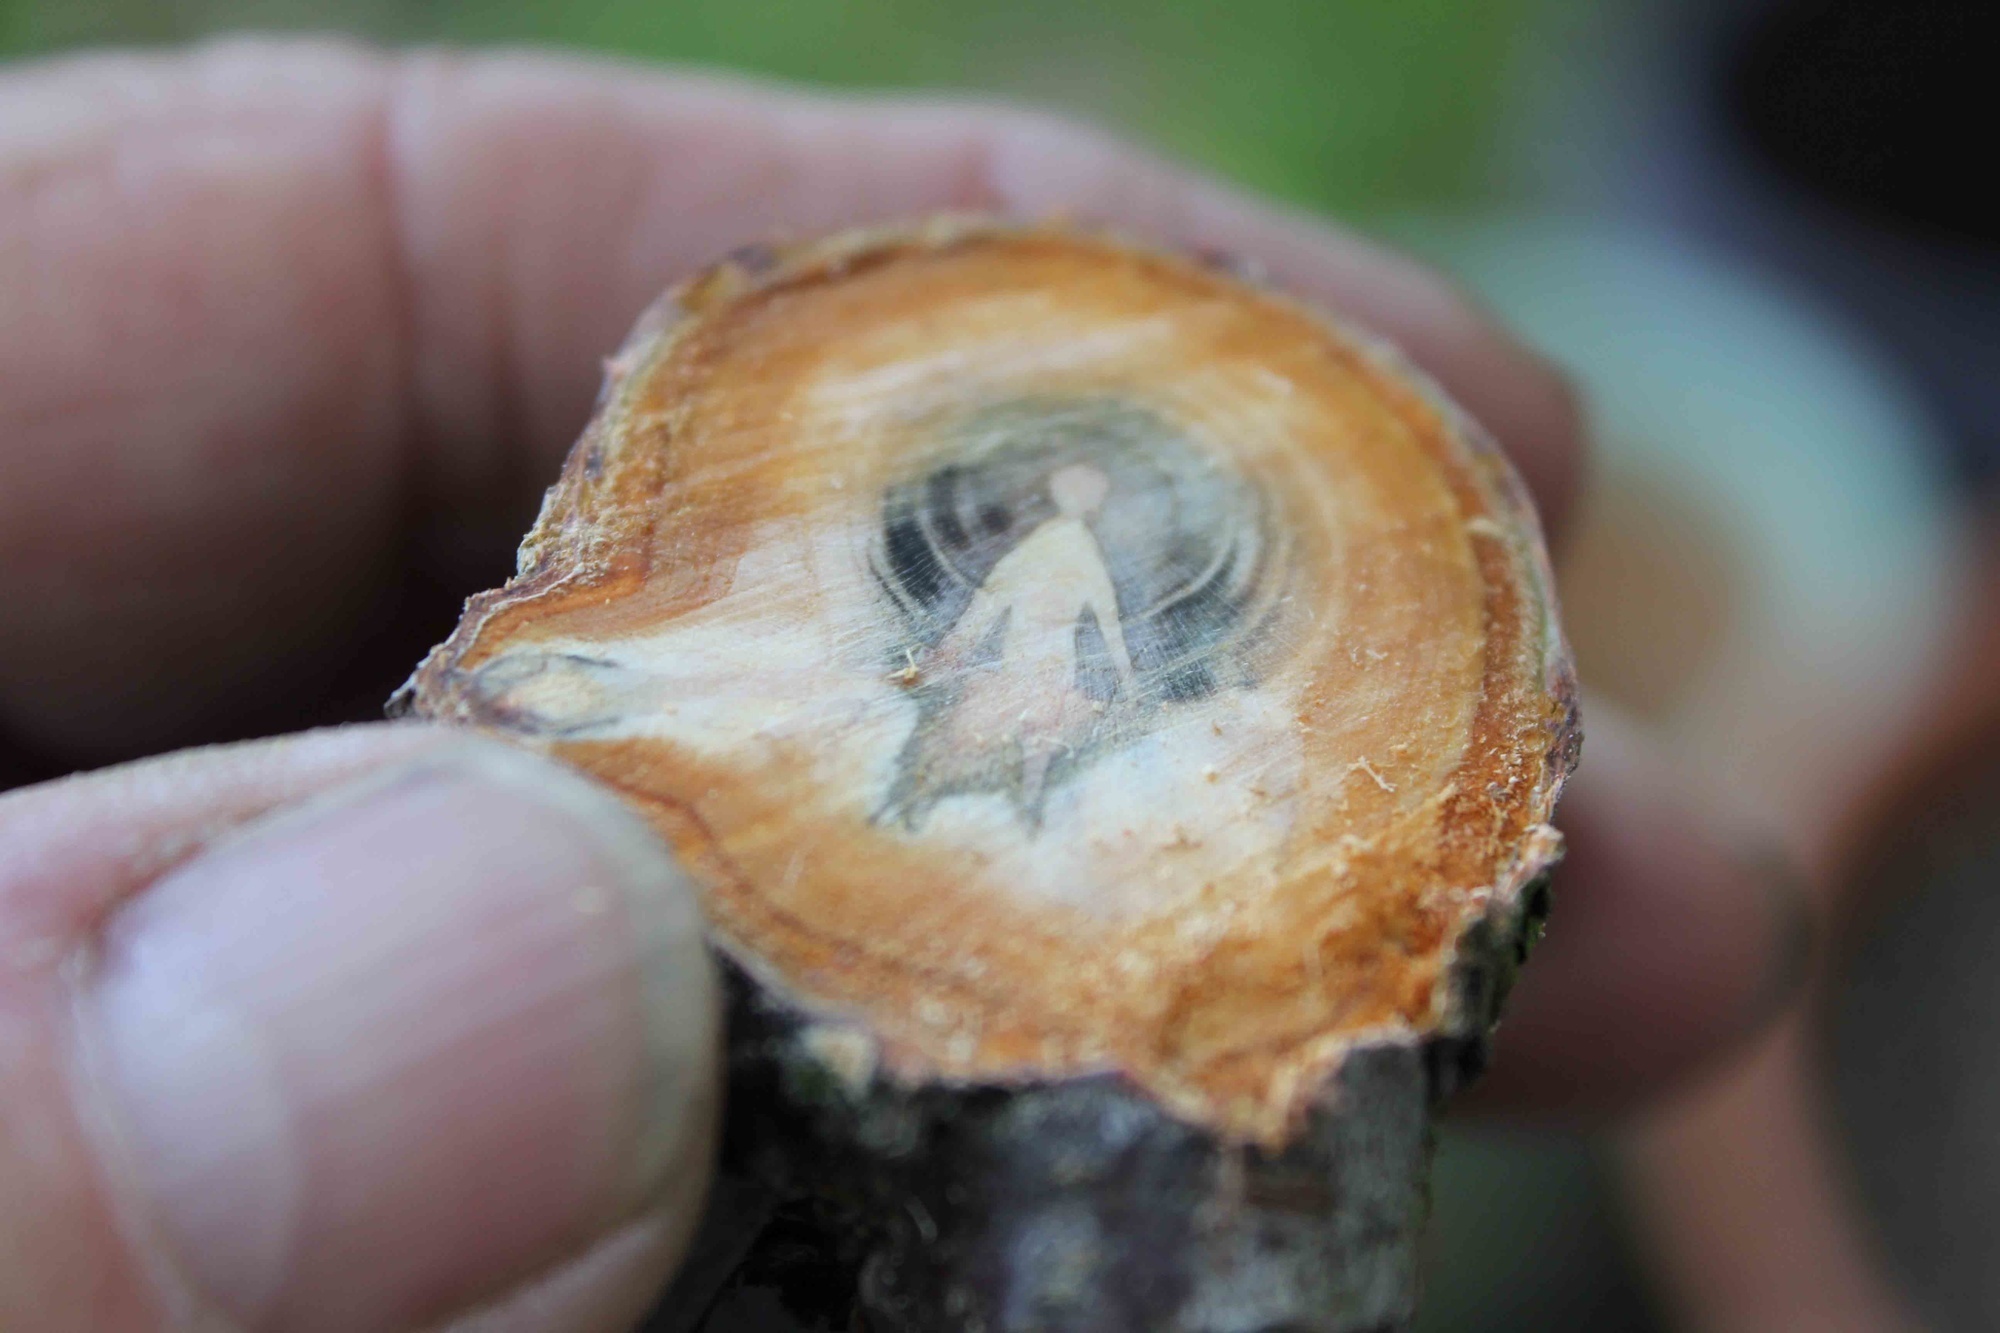 The core of an apricot tree looks like it has a man.